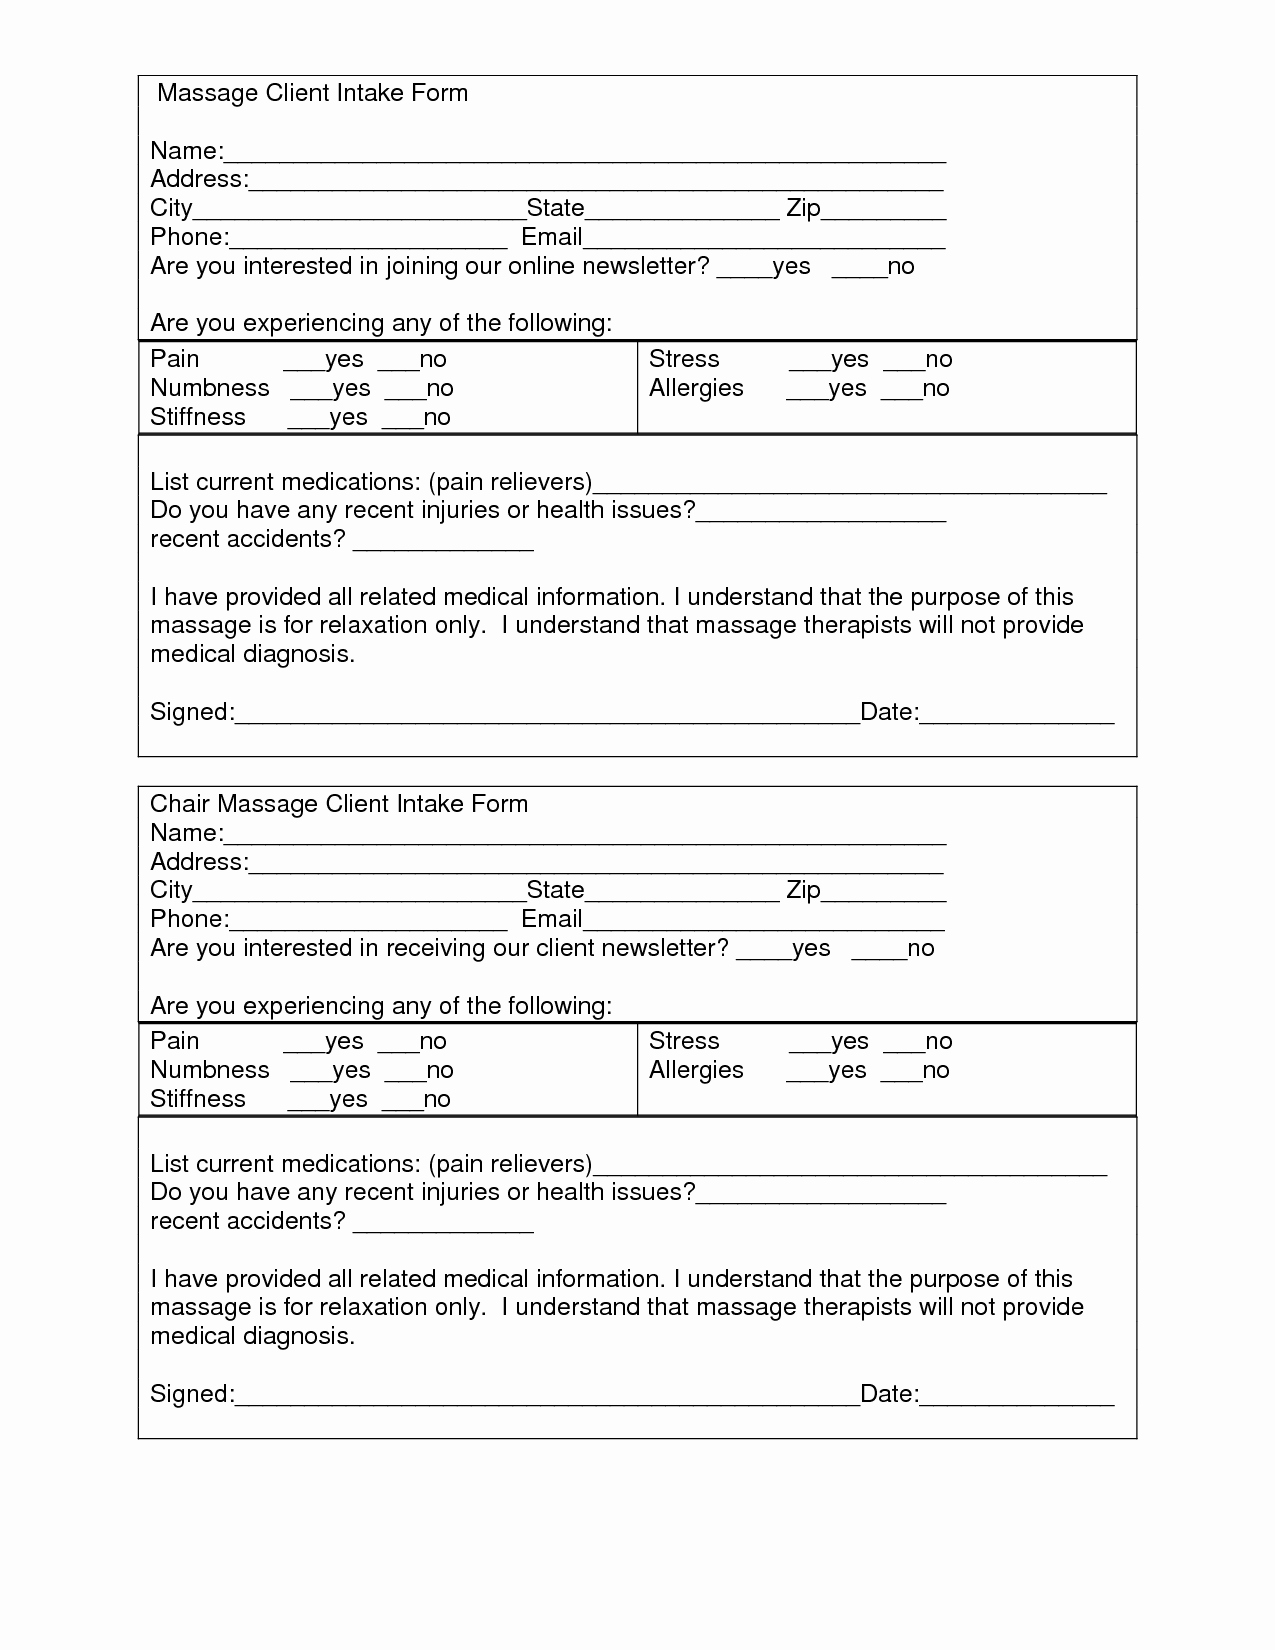 Medical Intake forms Template Awesome Massage Client Intake form Template